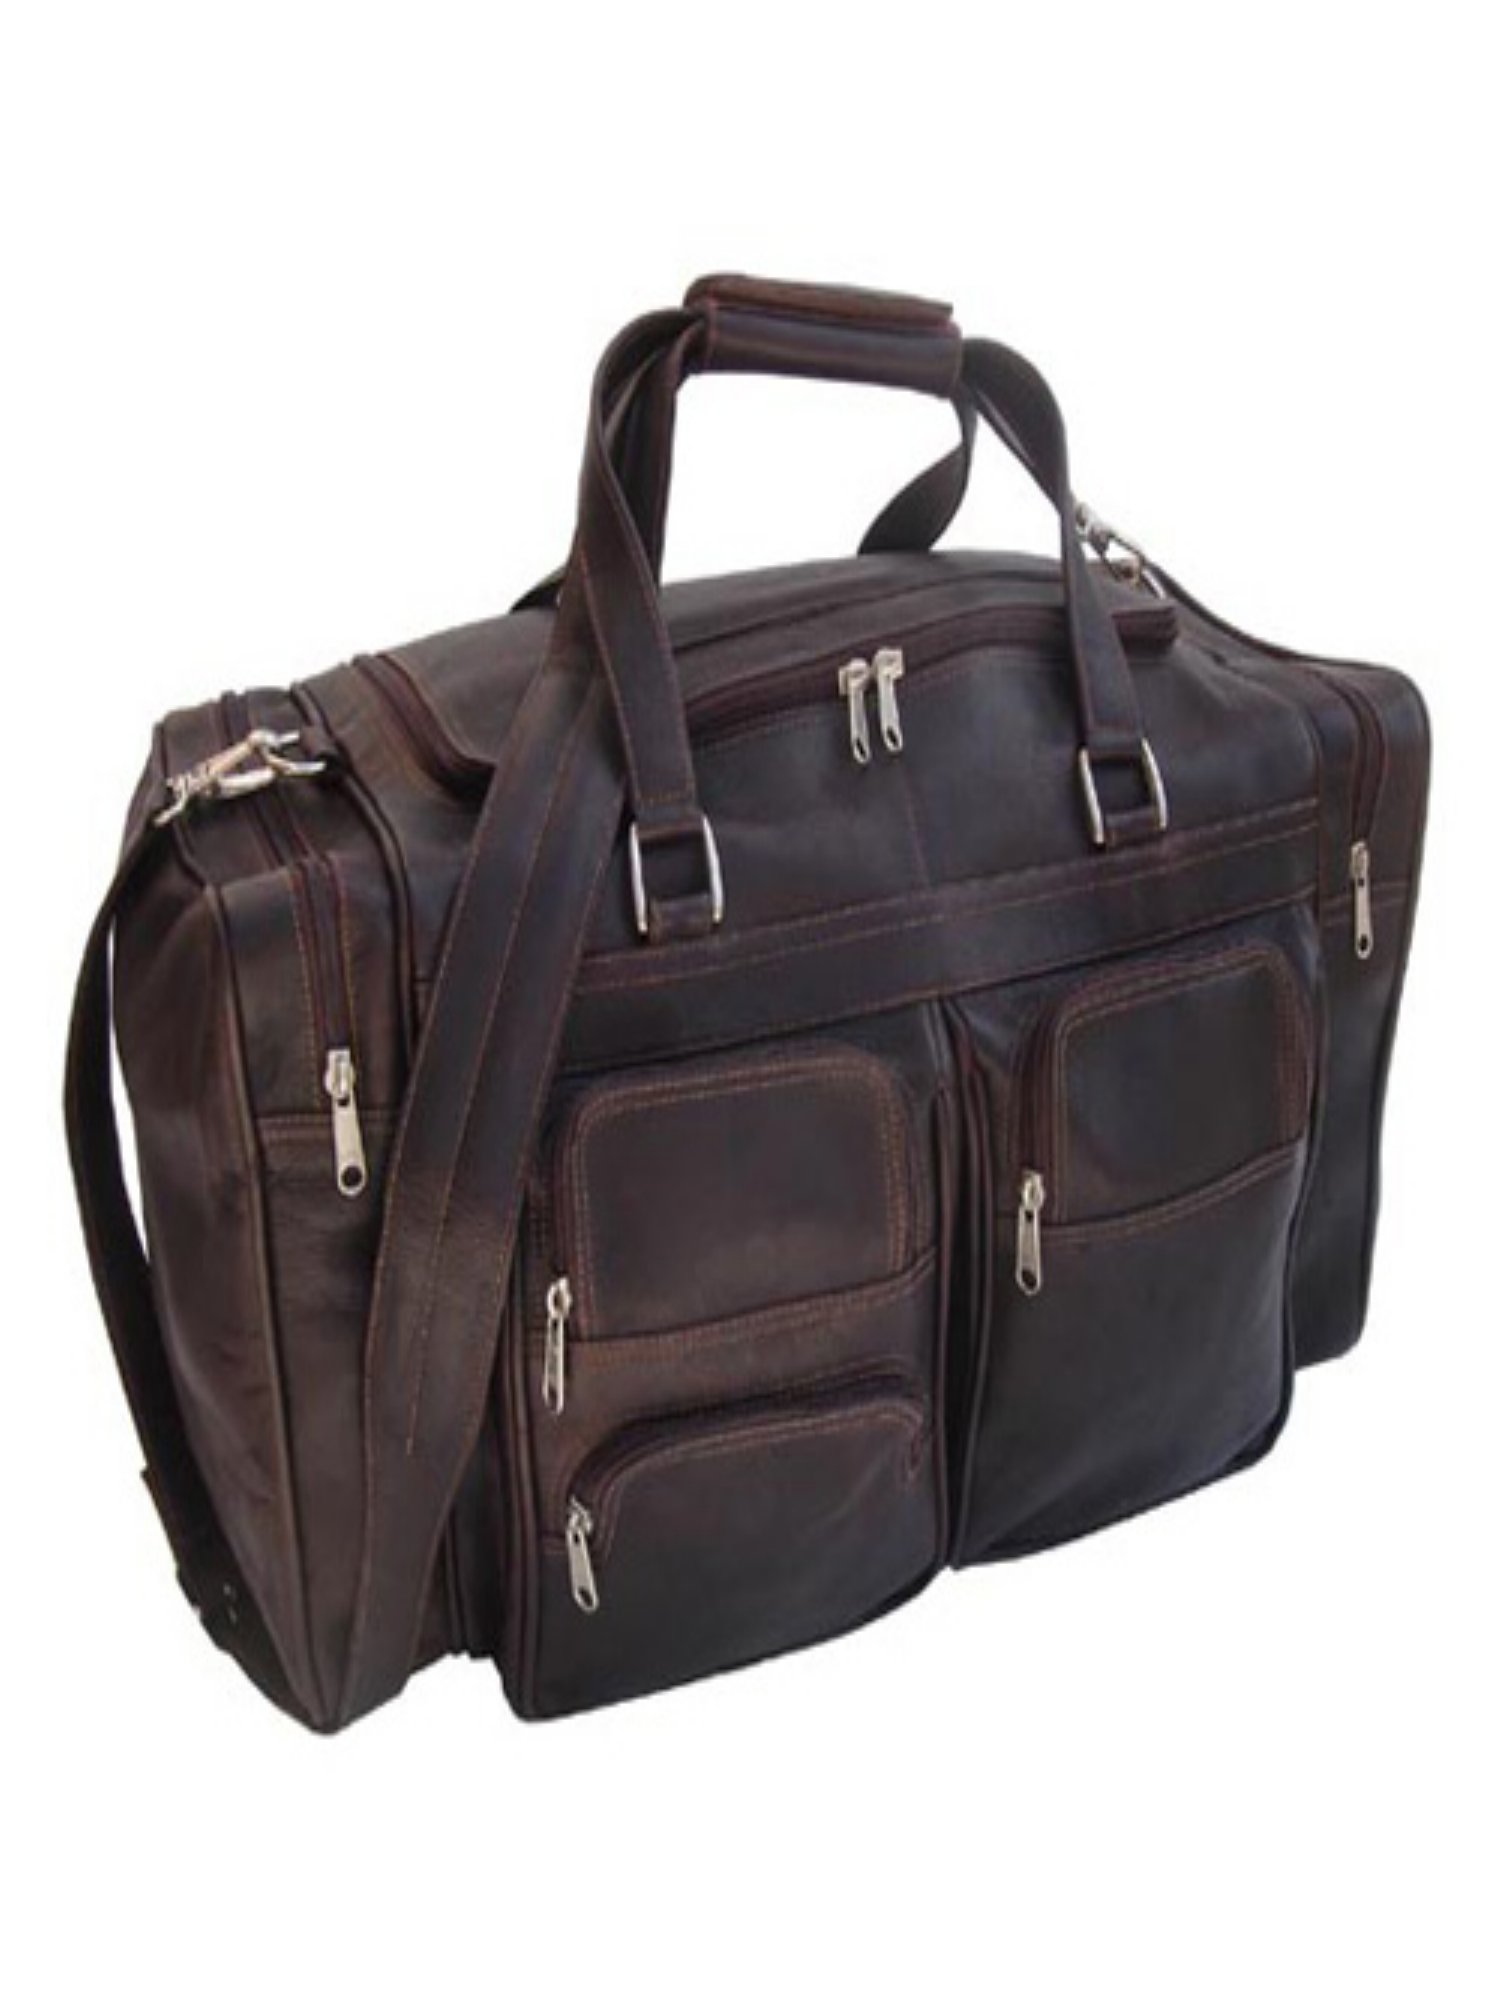 Piel Leather 20 inch Duffel Bag with Pockets - image 1 of 2